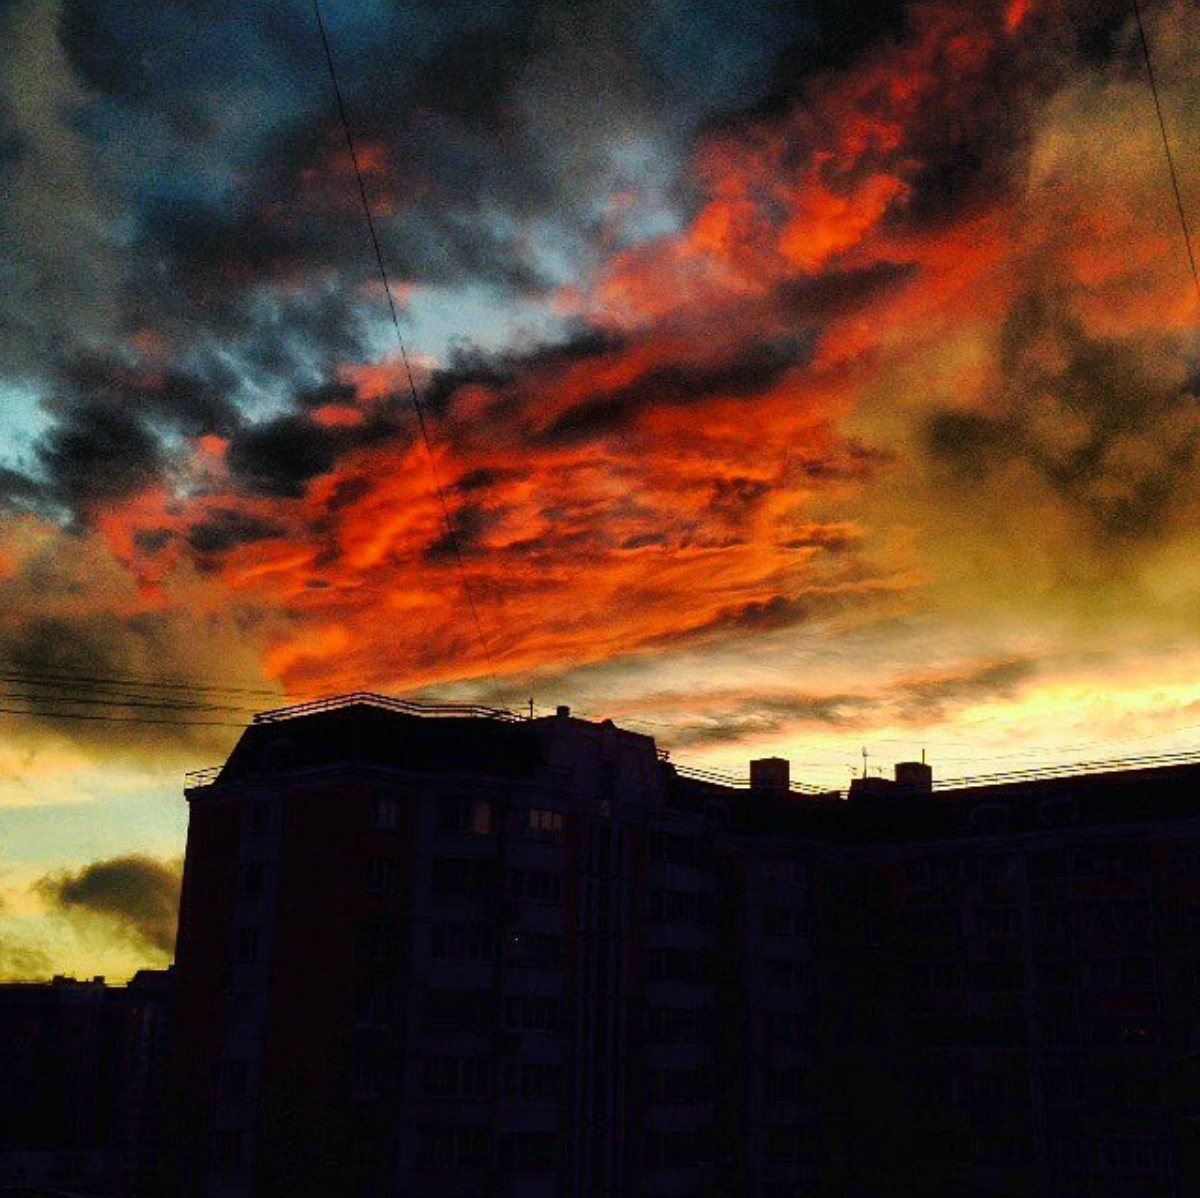 Exploding the sky / Sky on fire - My, Sky, Fire, Sunset, Clouds, The sun, Riot of colors, Smoke